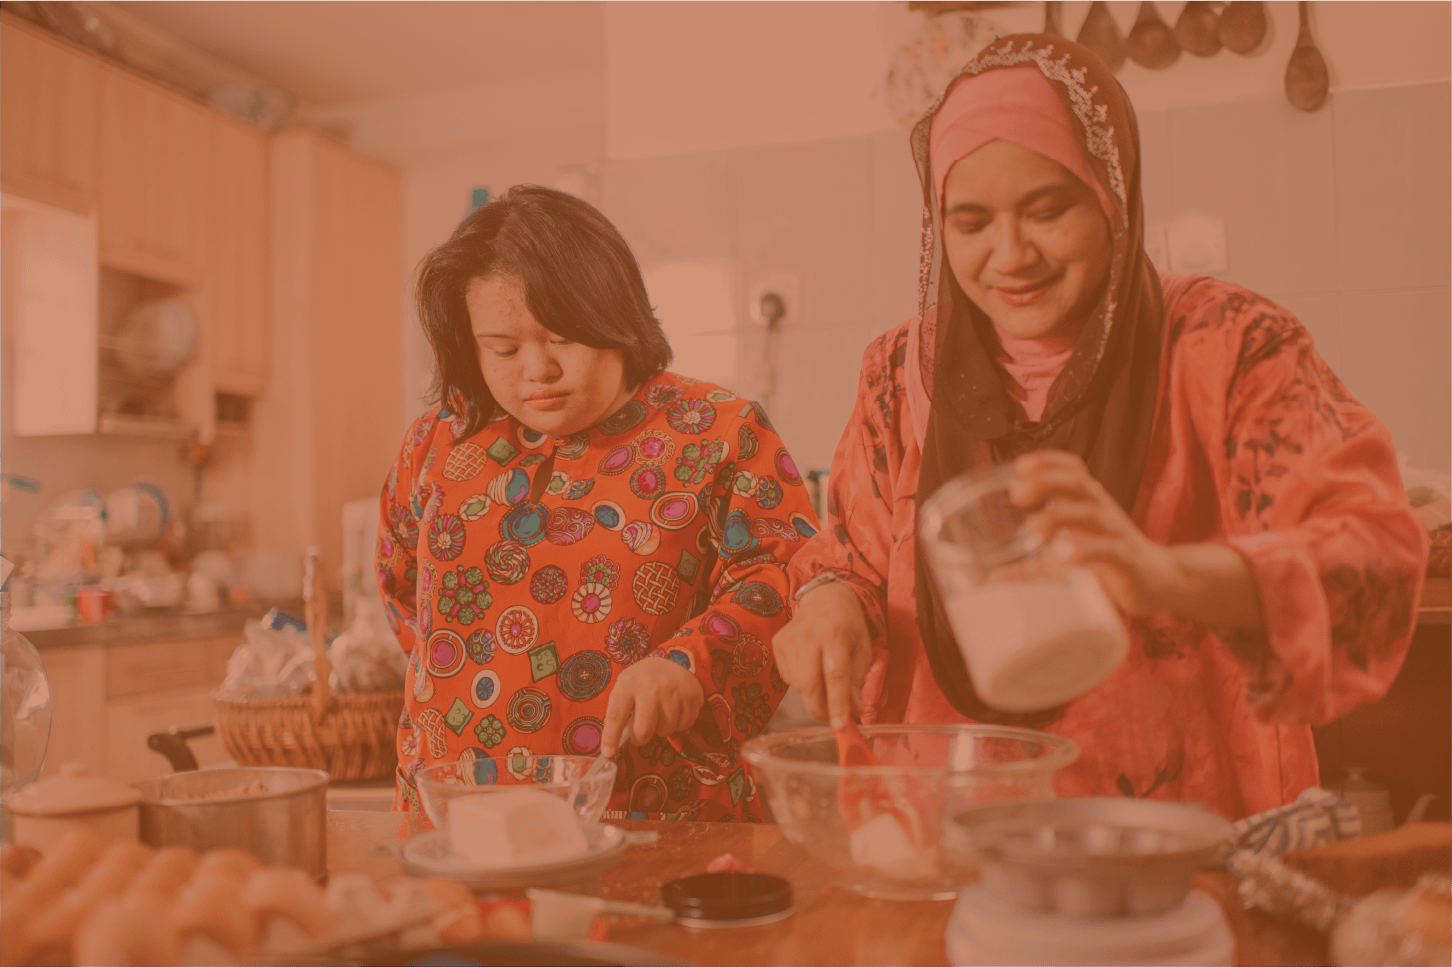 A Malaysian mother and her daughter with Down Syndrome baking in the kitchen.